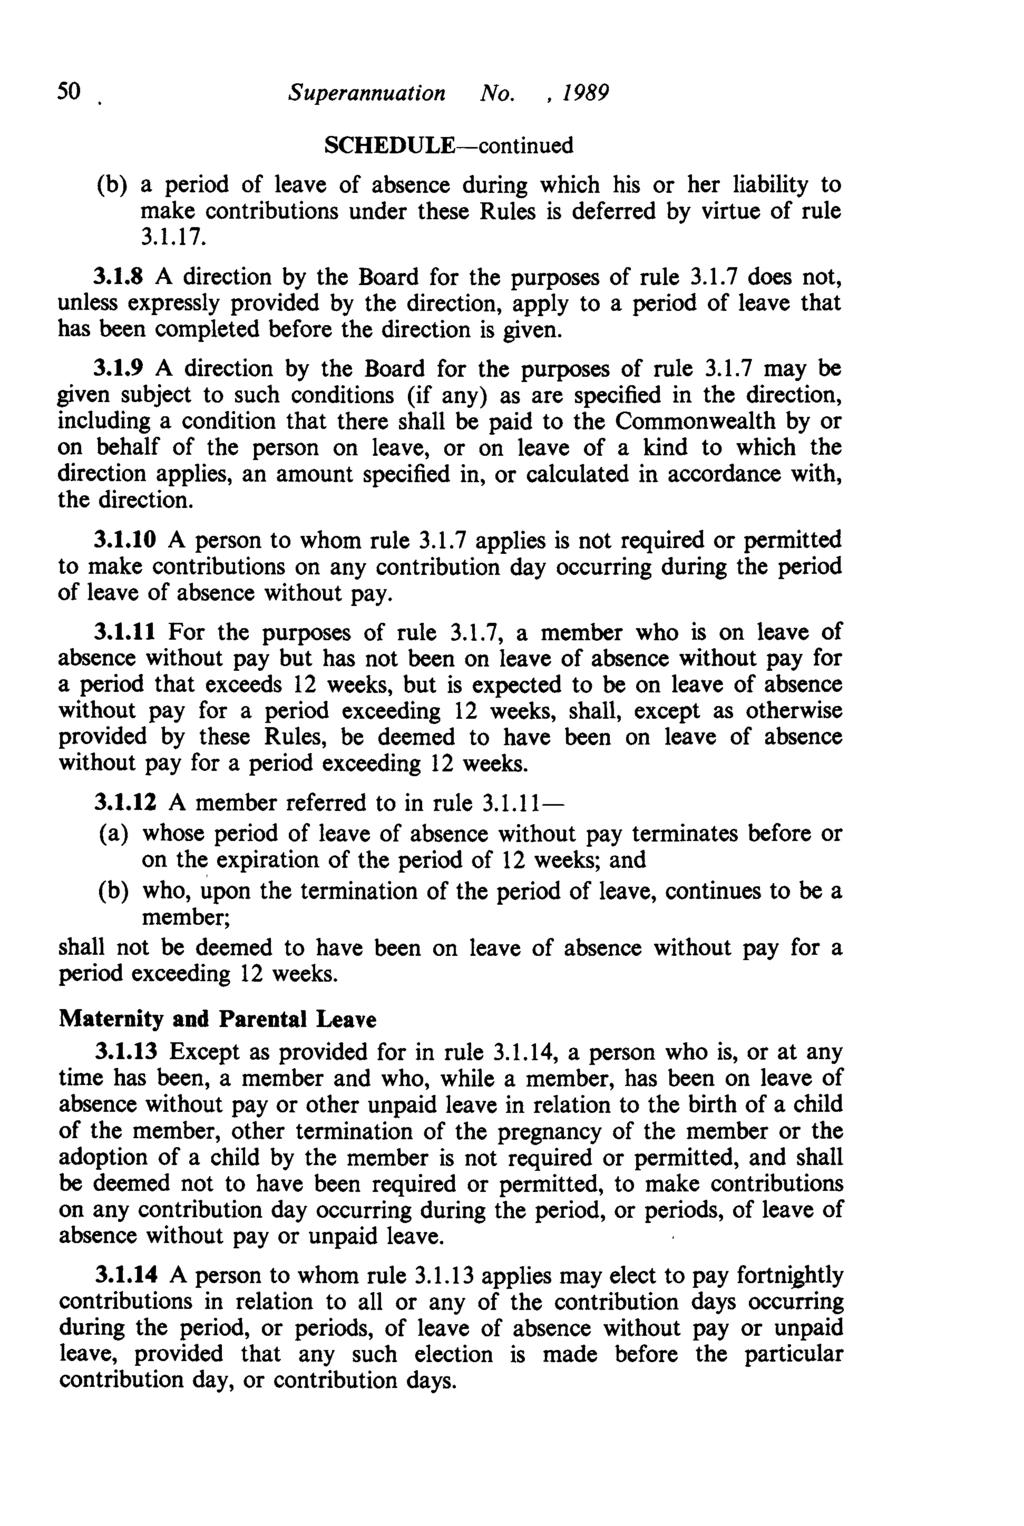 50 Superannuation No.,1989 (b) a period of leave of absence during which his or her liability to make contributions under these Rules is deferred by virtue of rule 3.1.17. 3.1.8 A direction by the Board for the purposes of rule 3.